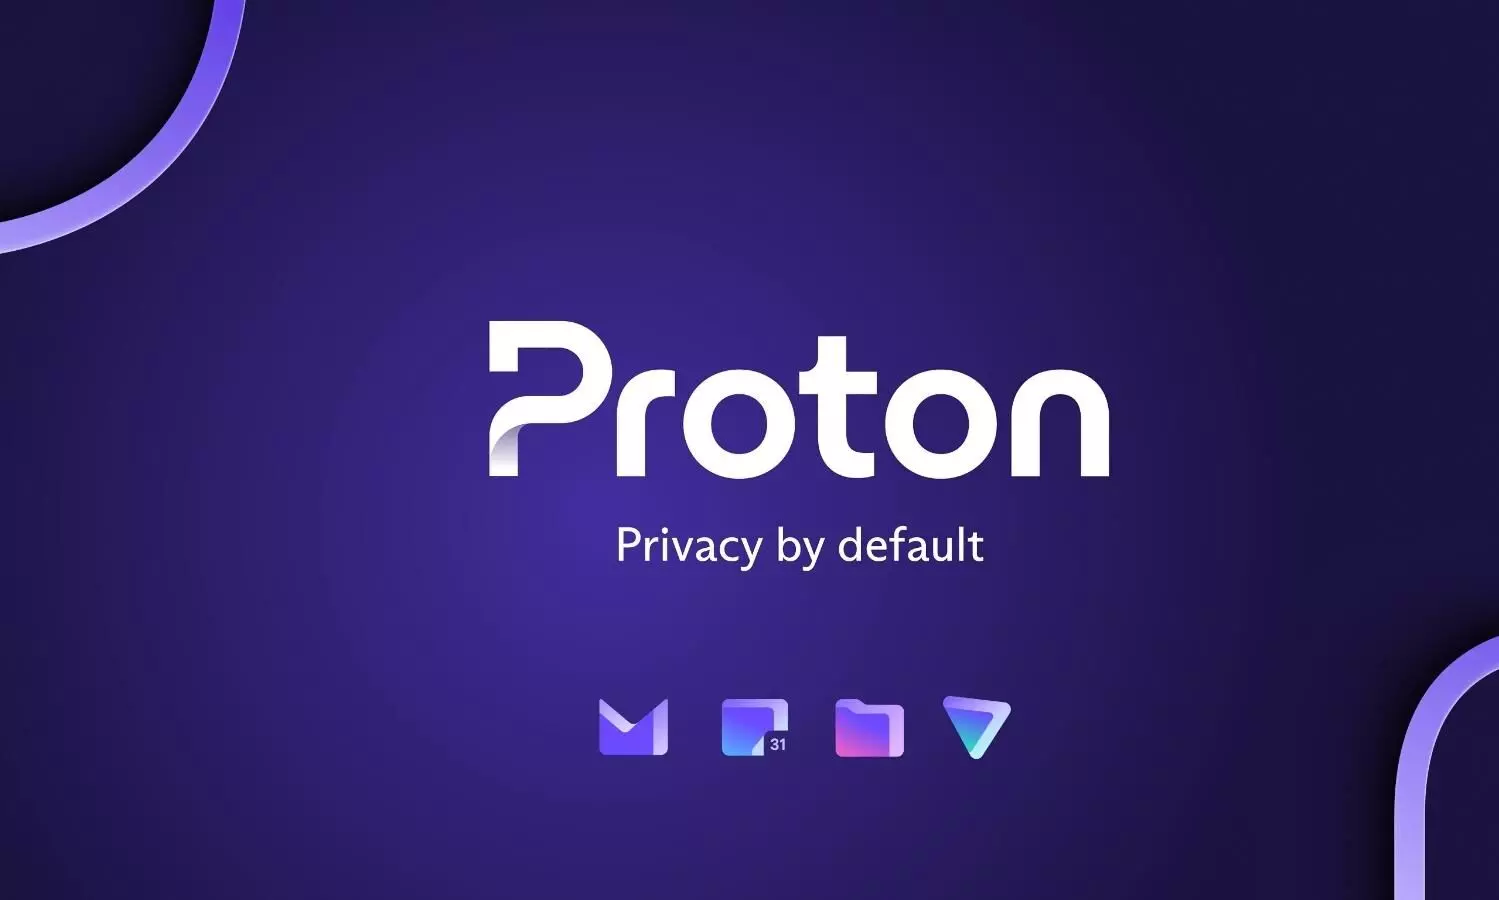 Privacy and access to internet are part of freedom: Proton